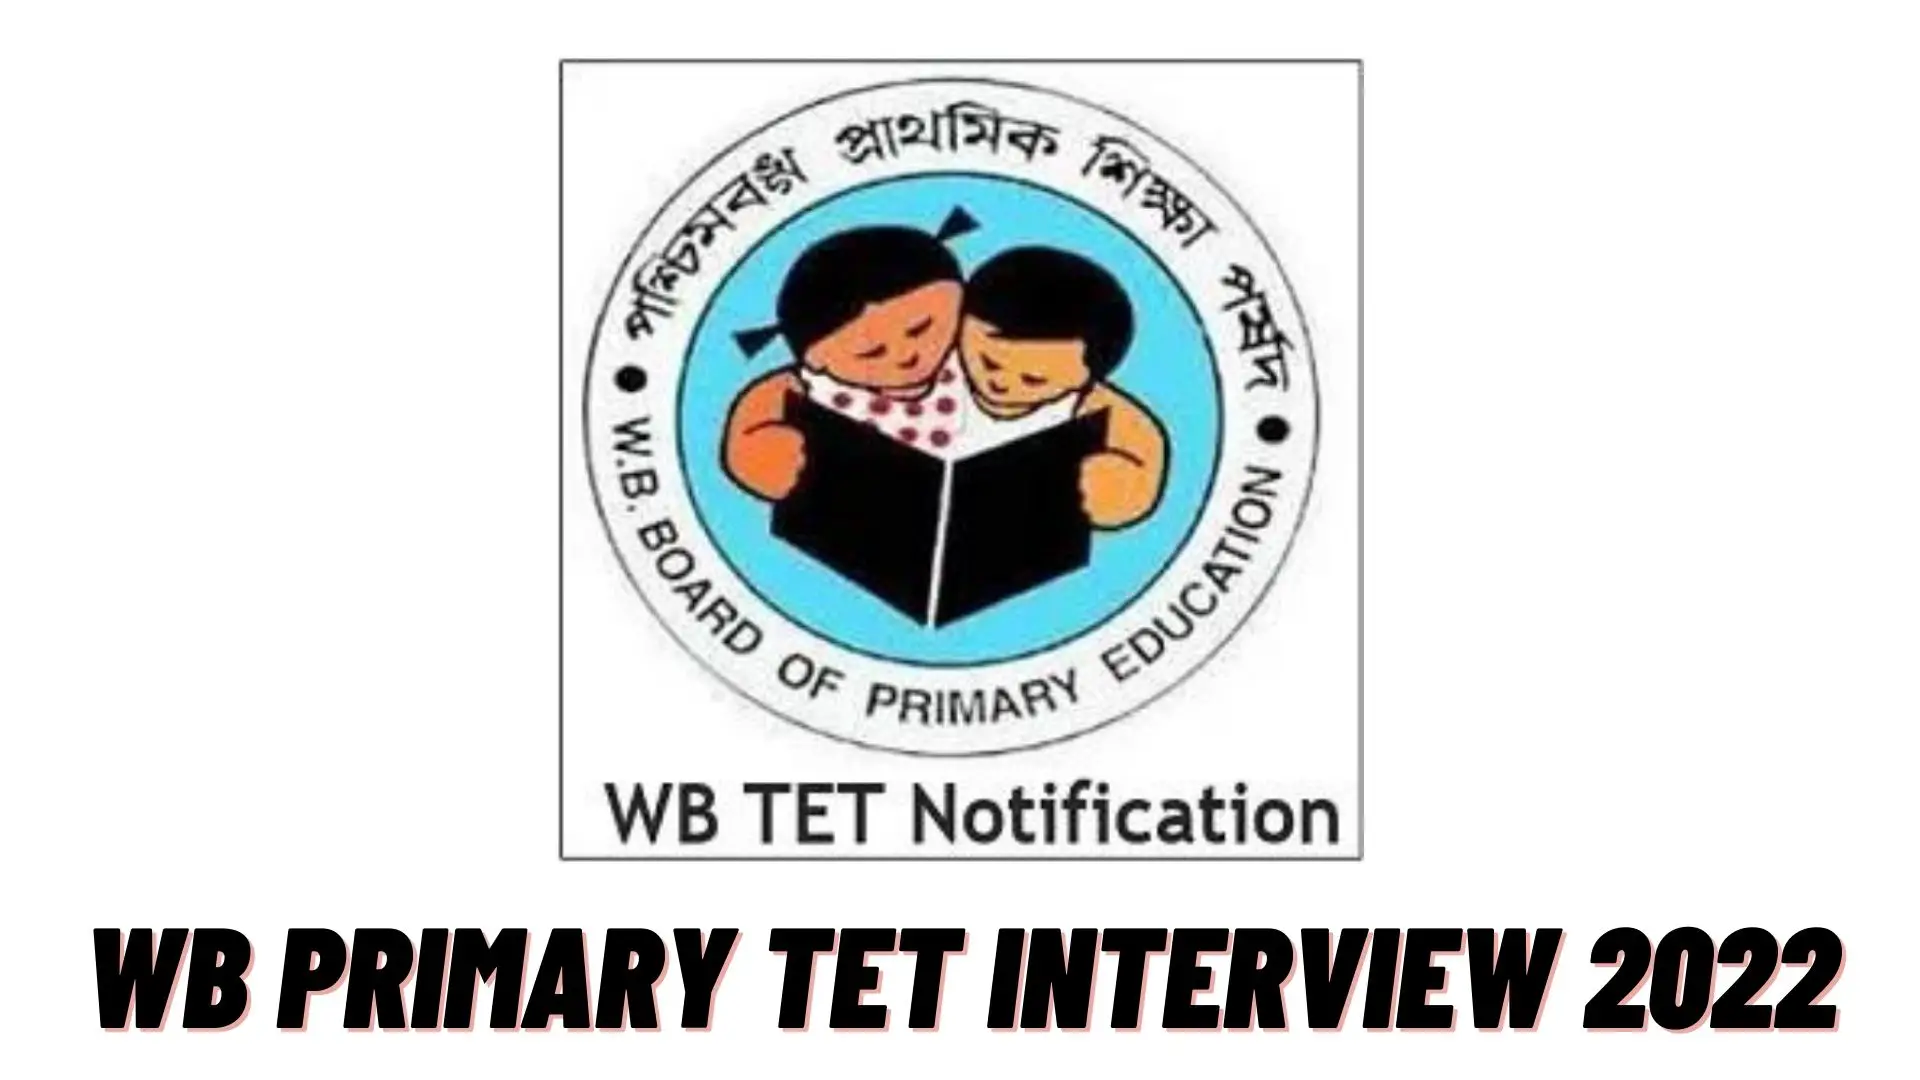 WB Primary TET Interview 2022